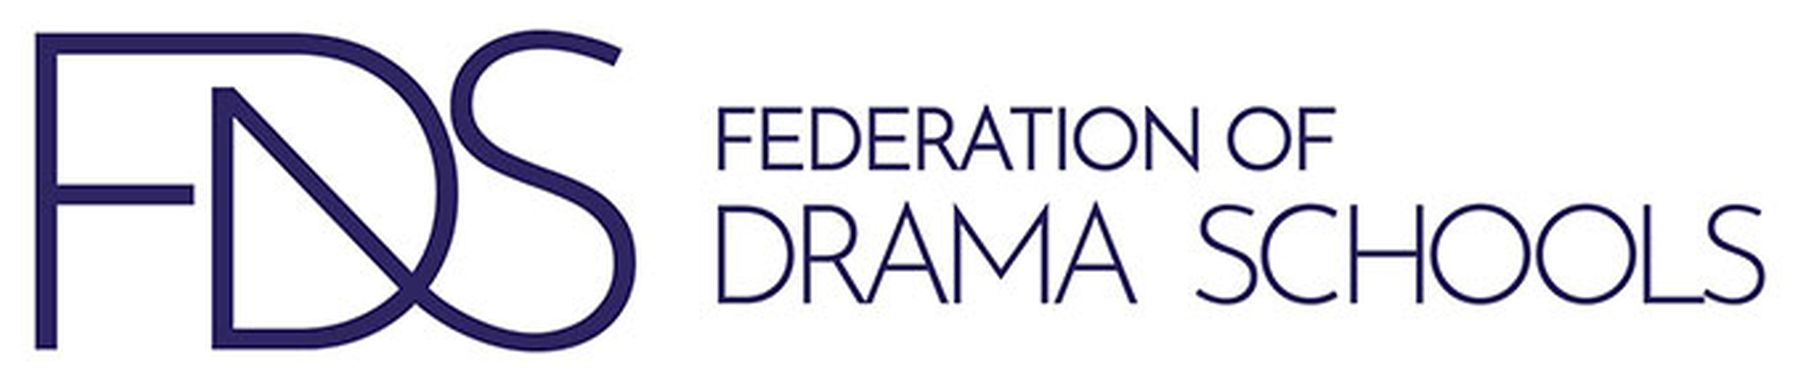 Accredited by Federation of Drama Schools